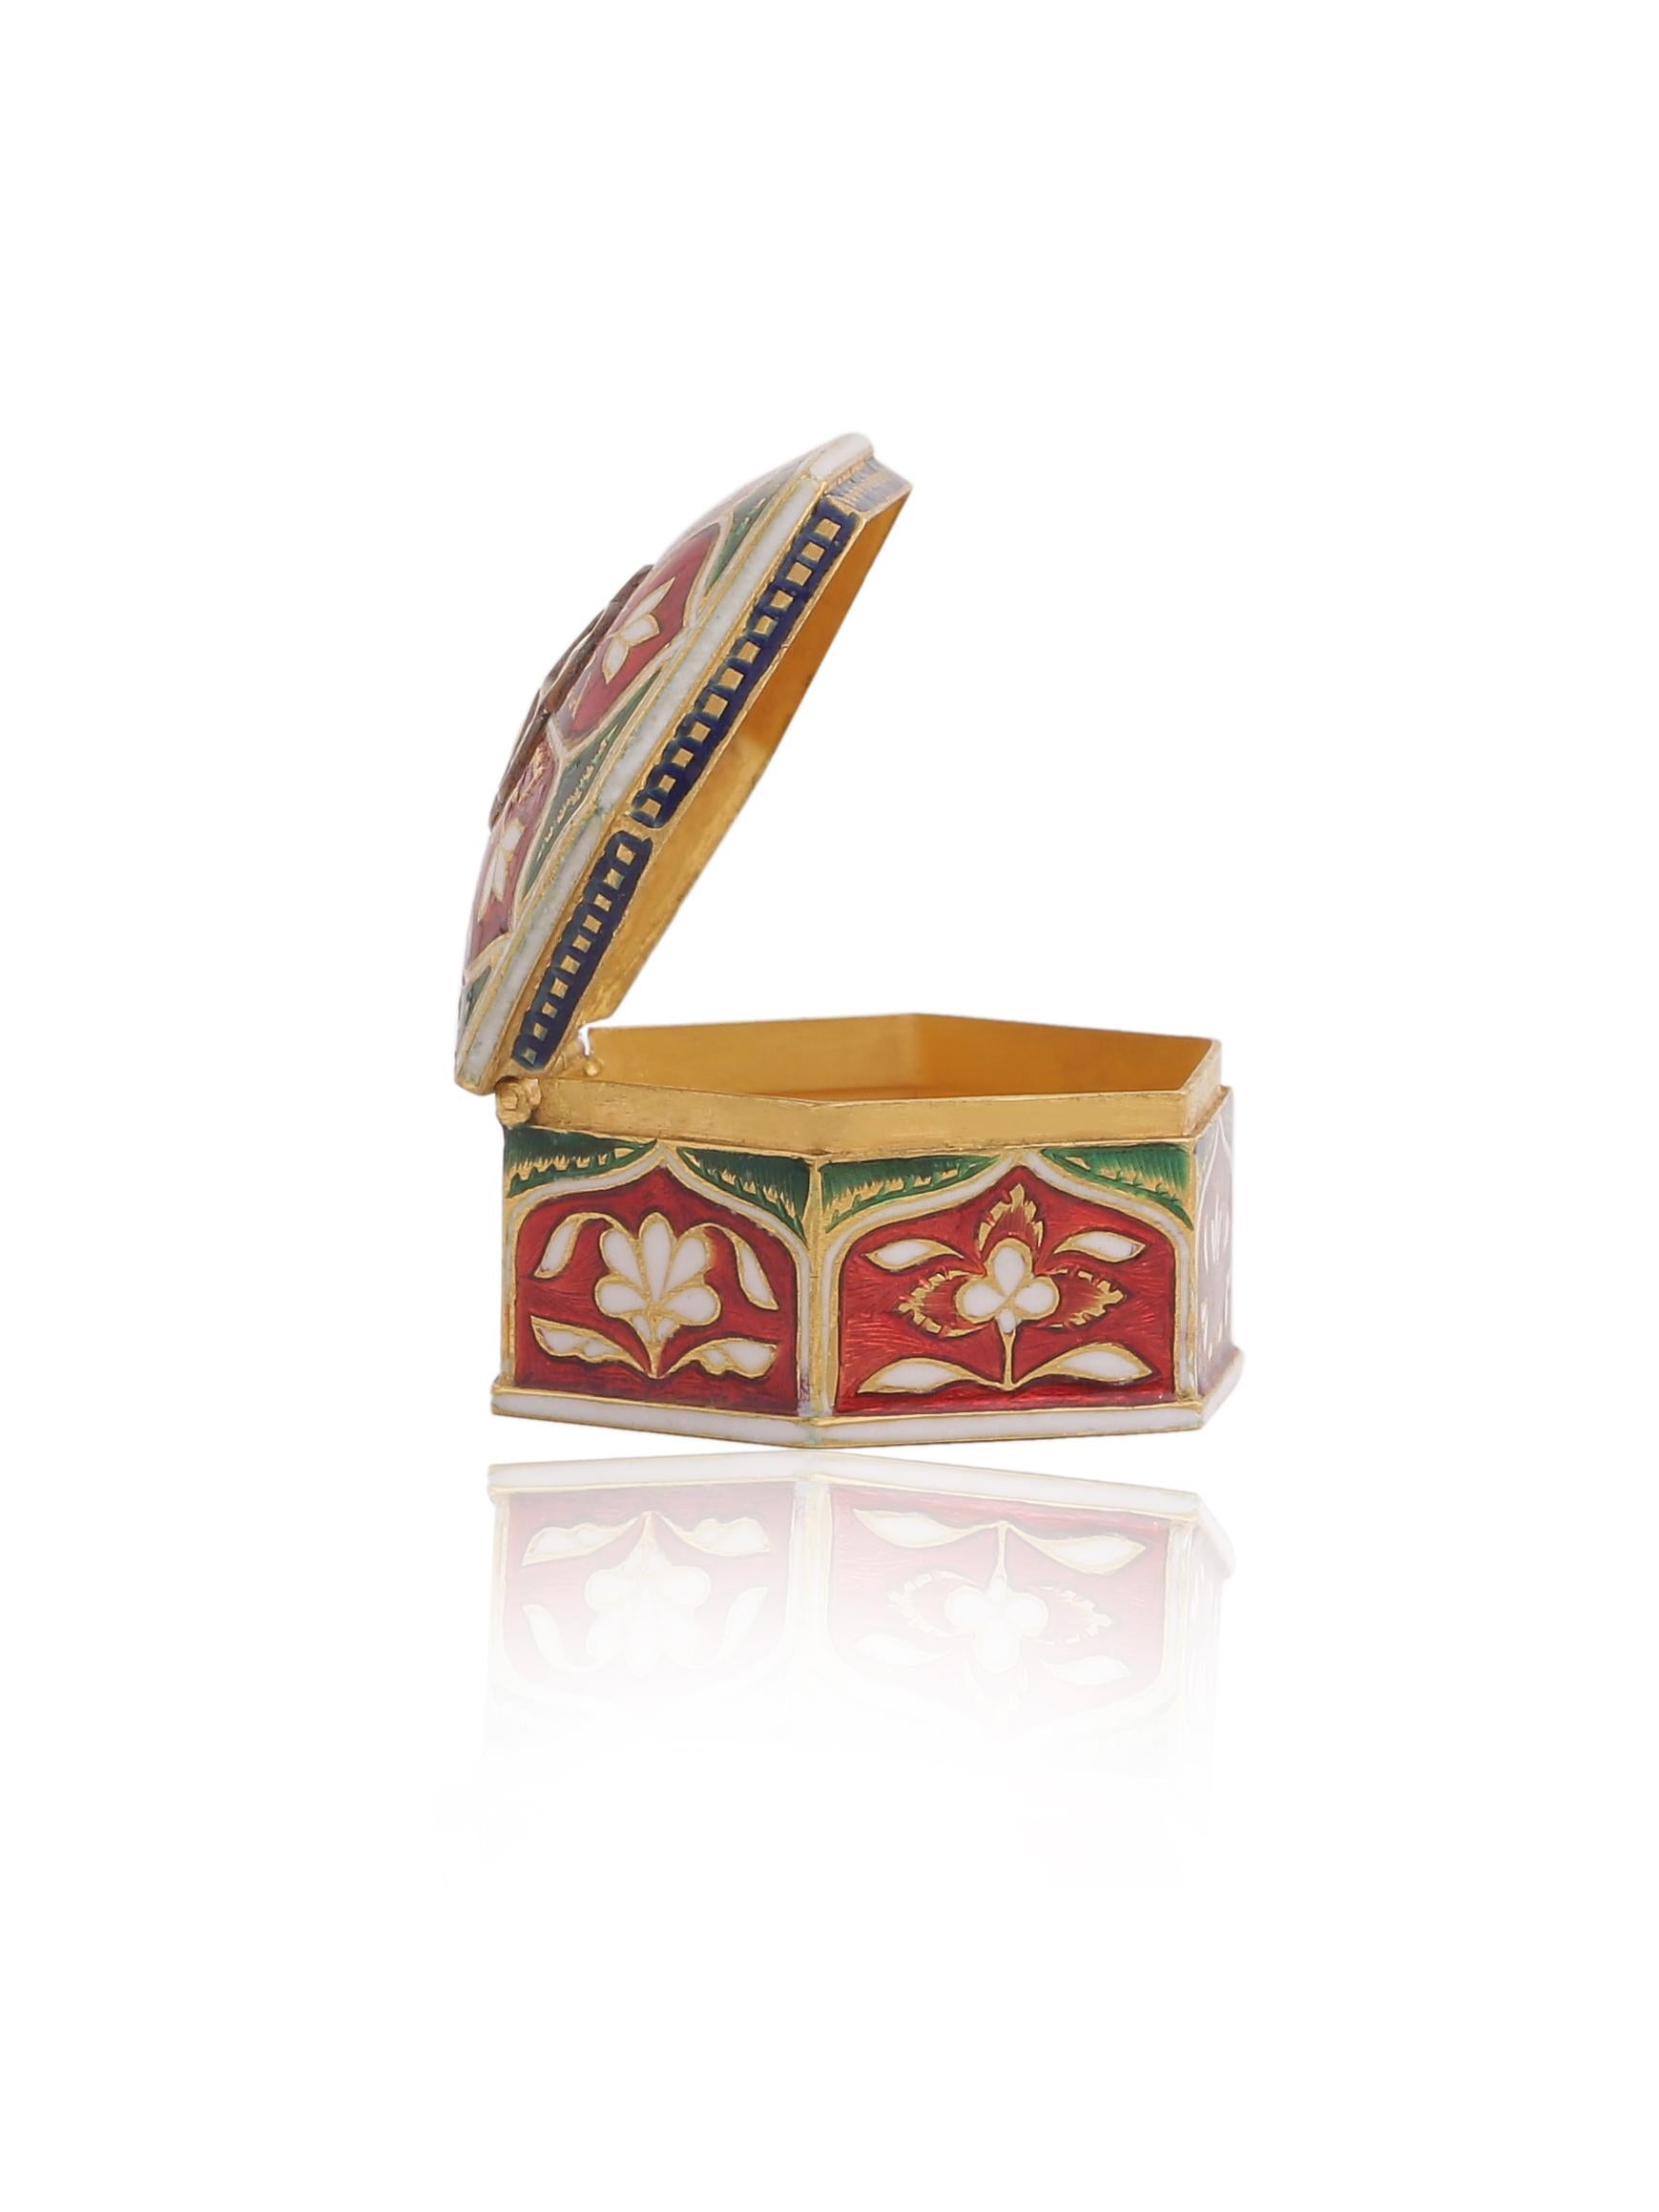 Art Deco Enamel Box with Diamonds Handcrafted in 18 Karat Gold For Sale